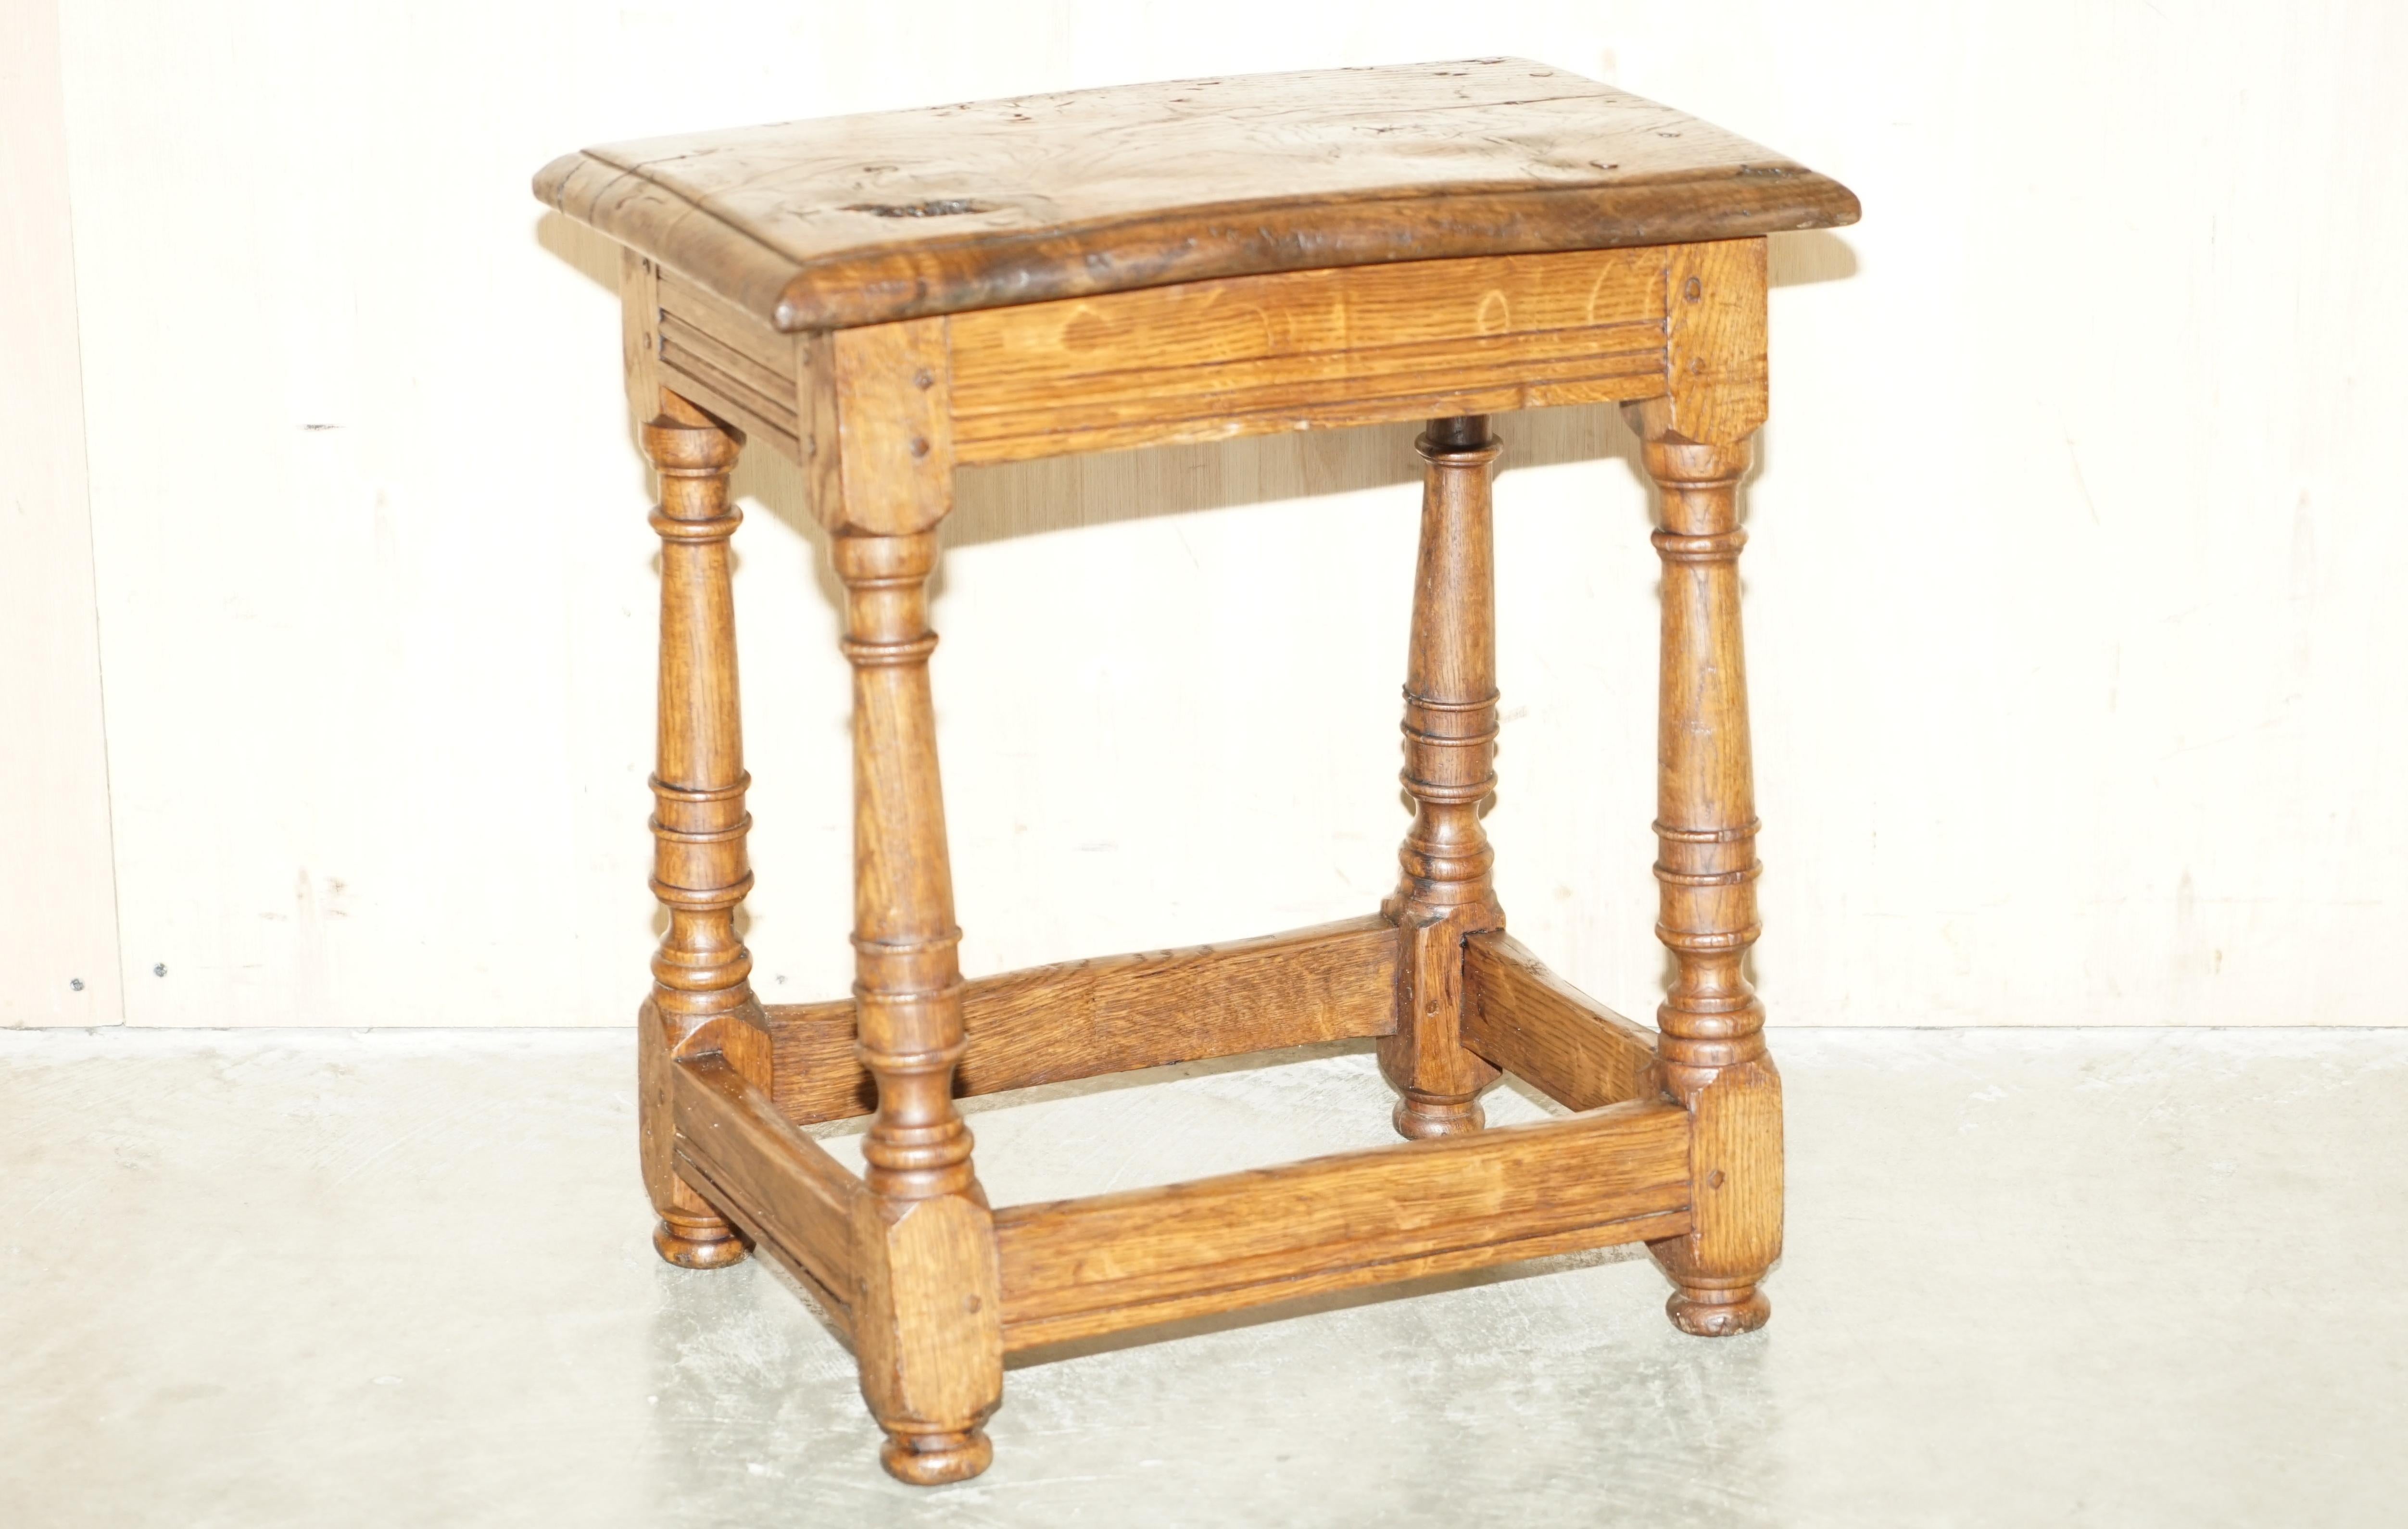 Royal House Antiques

Royal House Antiques is delighted to offer for sale this absolutely stunning circa 1760-1780 English burr oak jointed stool which can be used as a side table 

Please note the delivery fee listed is just a guide, it covers